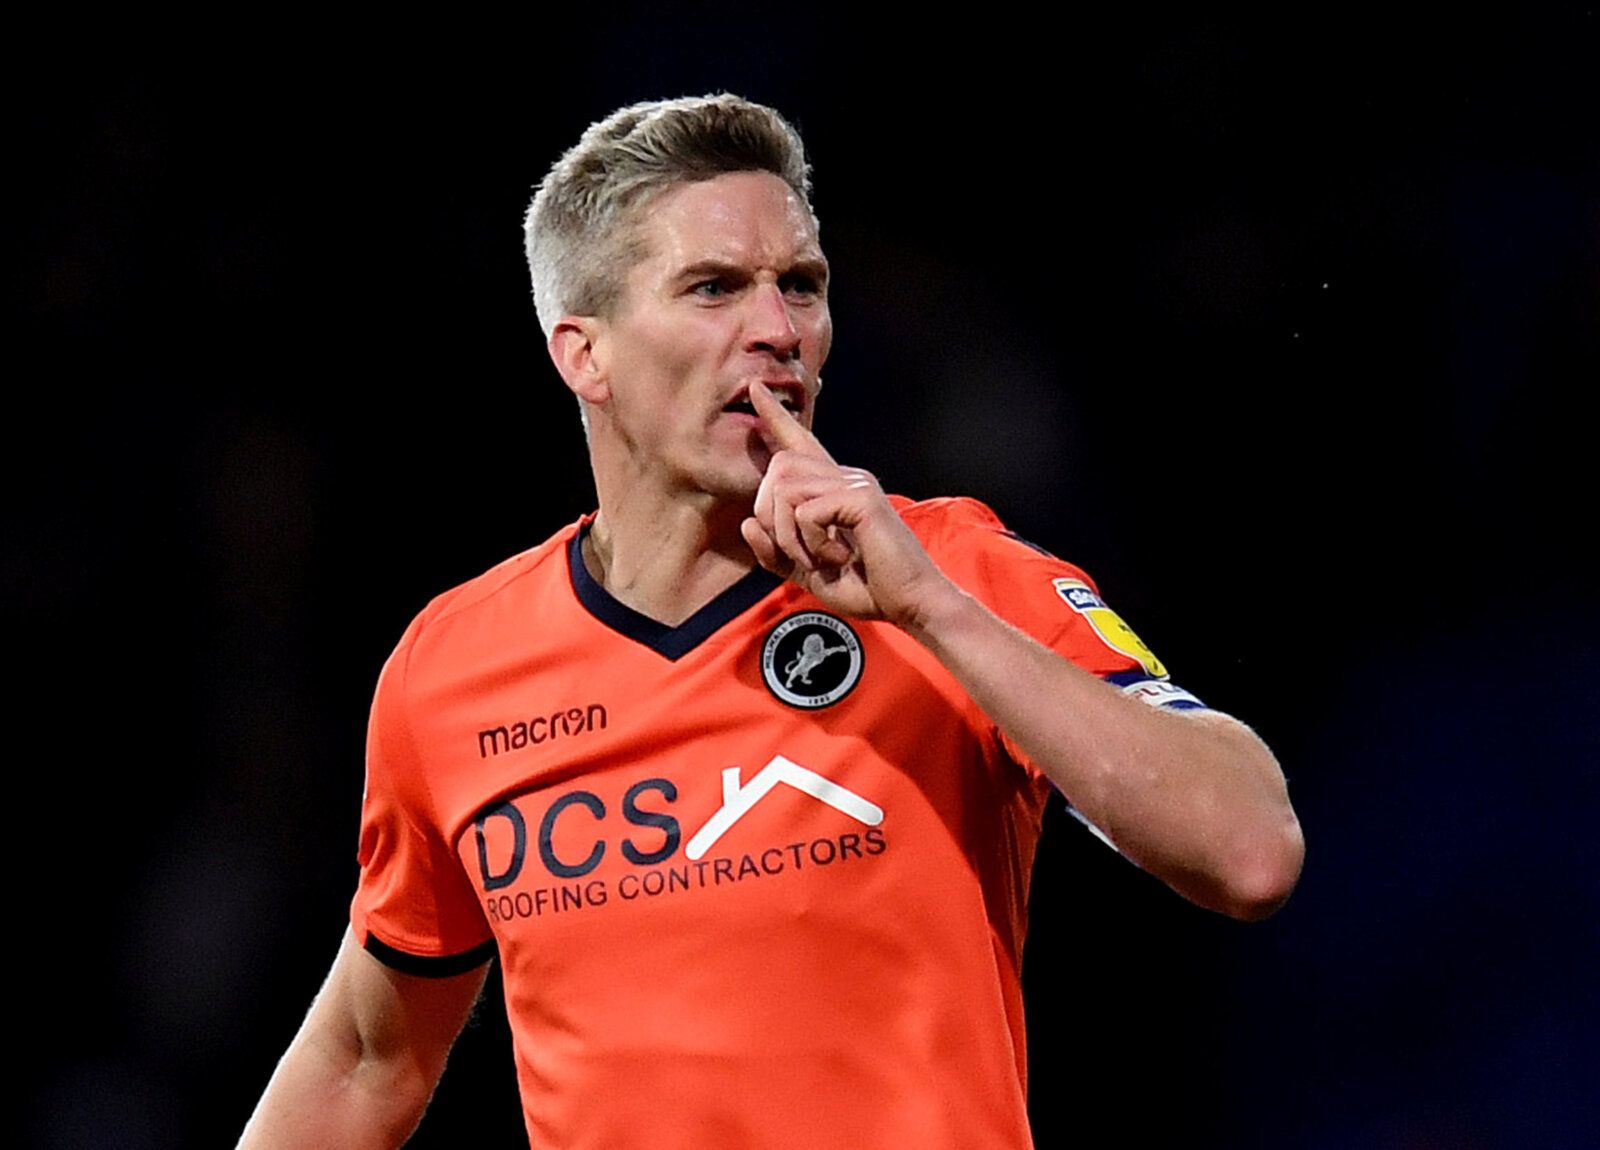 Soccer Football - Championship - Ipswich Town v Millwall - Portman Road, Ipswich, Britain - January 1, 2019   Millwall's Steve Morison celebrates at the end of the match   Action Images/Alan Walter    EDITORIAL USE ONLY. No use with unauthorized audio, video, data, fixture lists, club/league logos or 